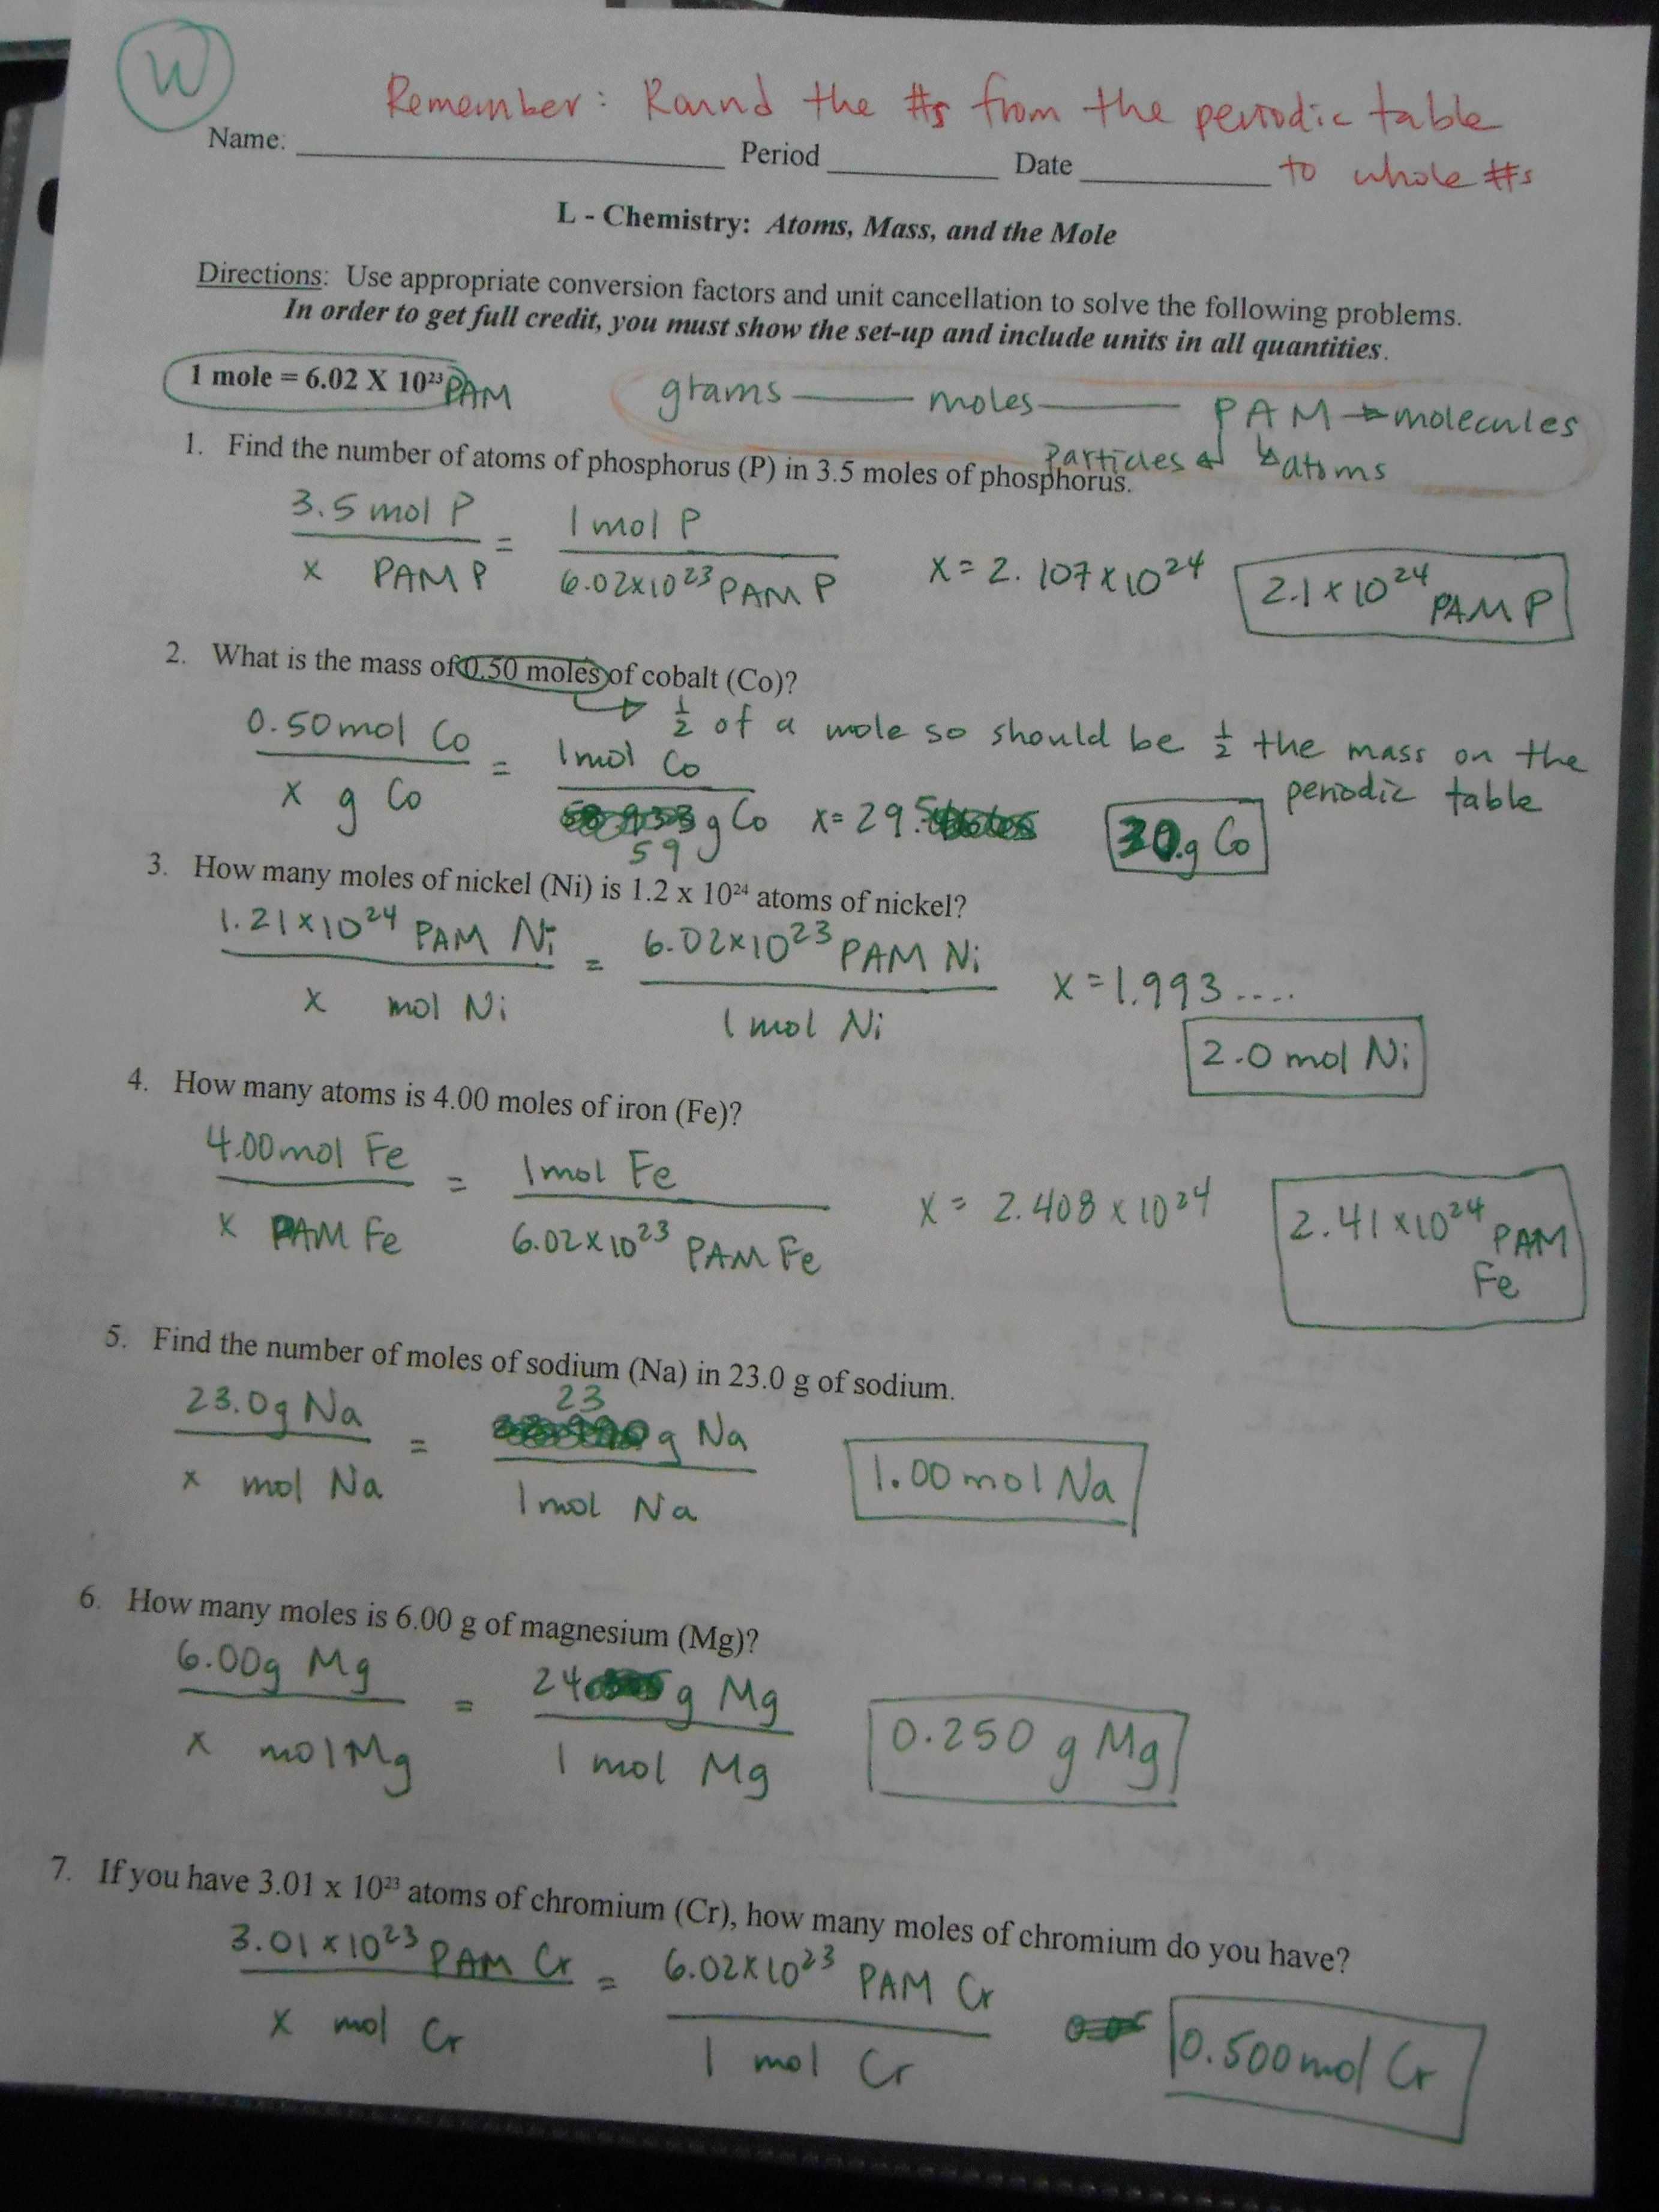 Nuclear Chemistry Worksheet Answer Key Unique Nuclear Chemistry Worksheet K Answer Key